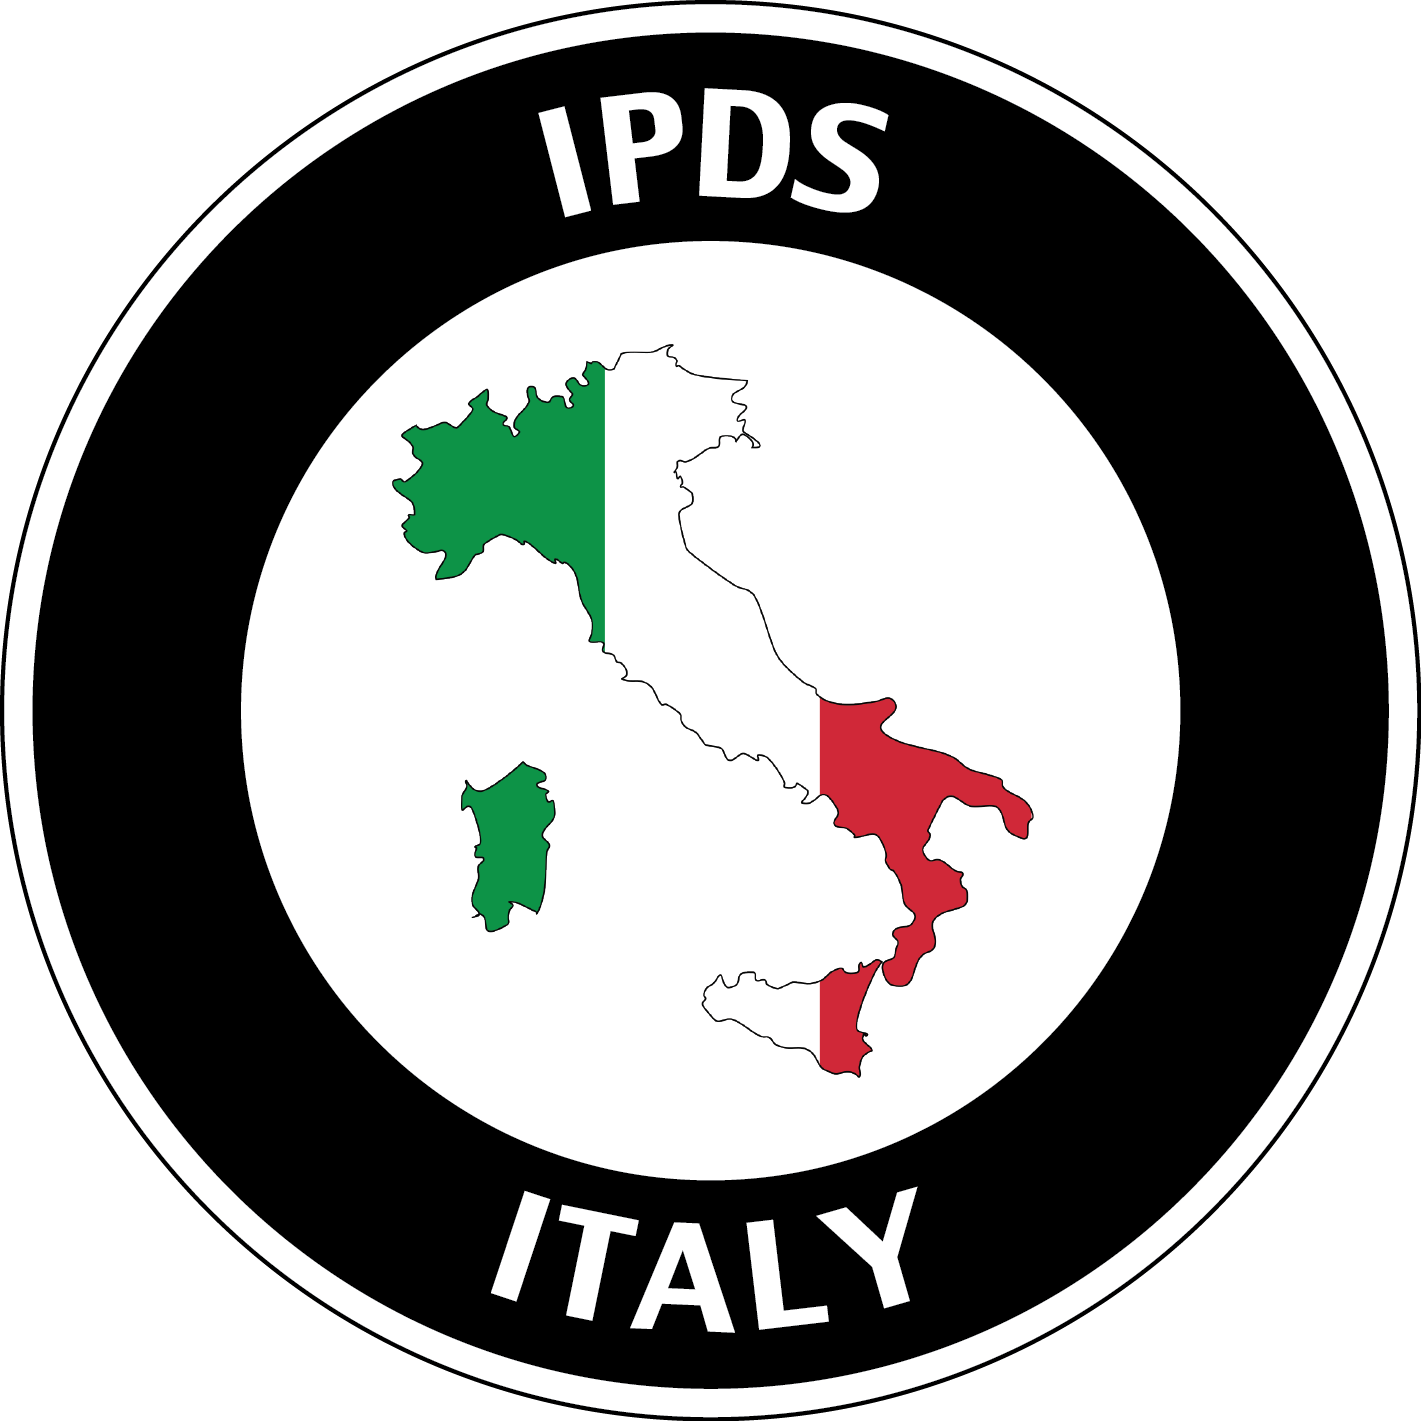 IPDS Italy icon with country and flag